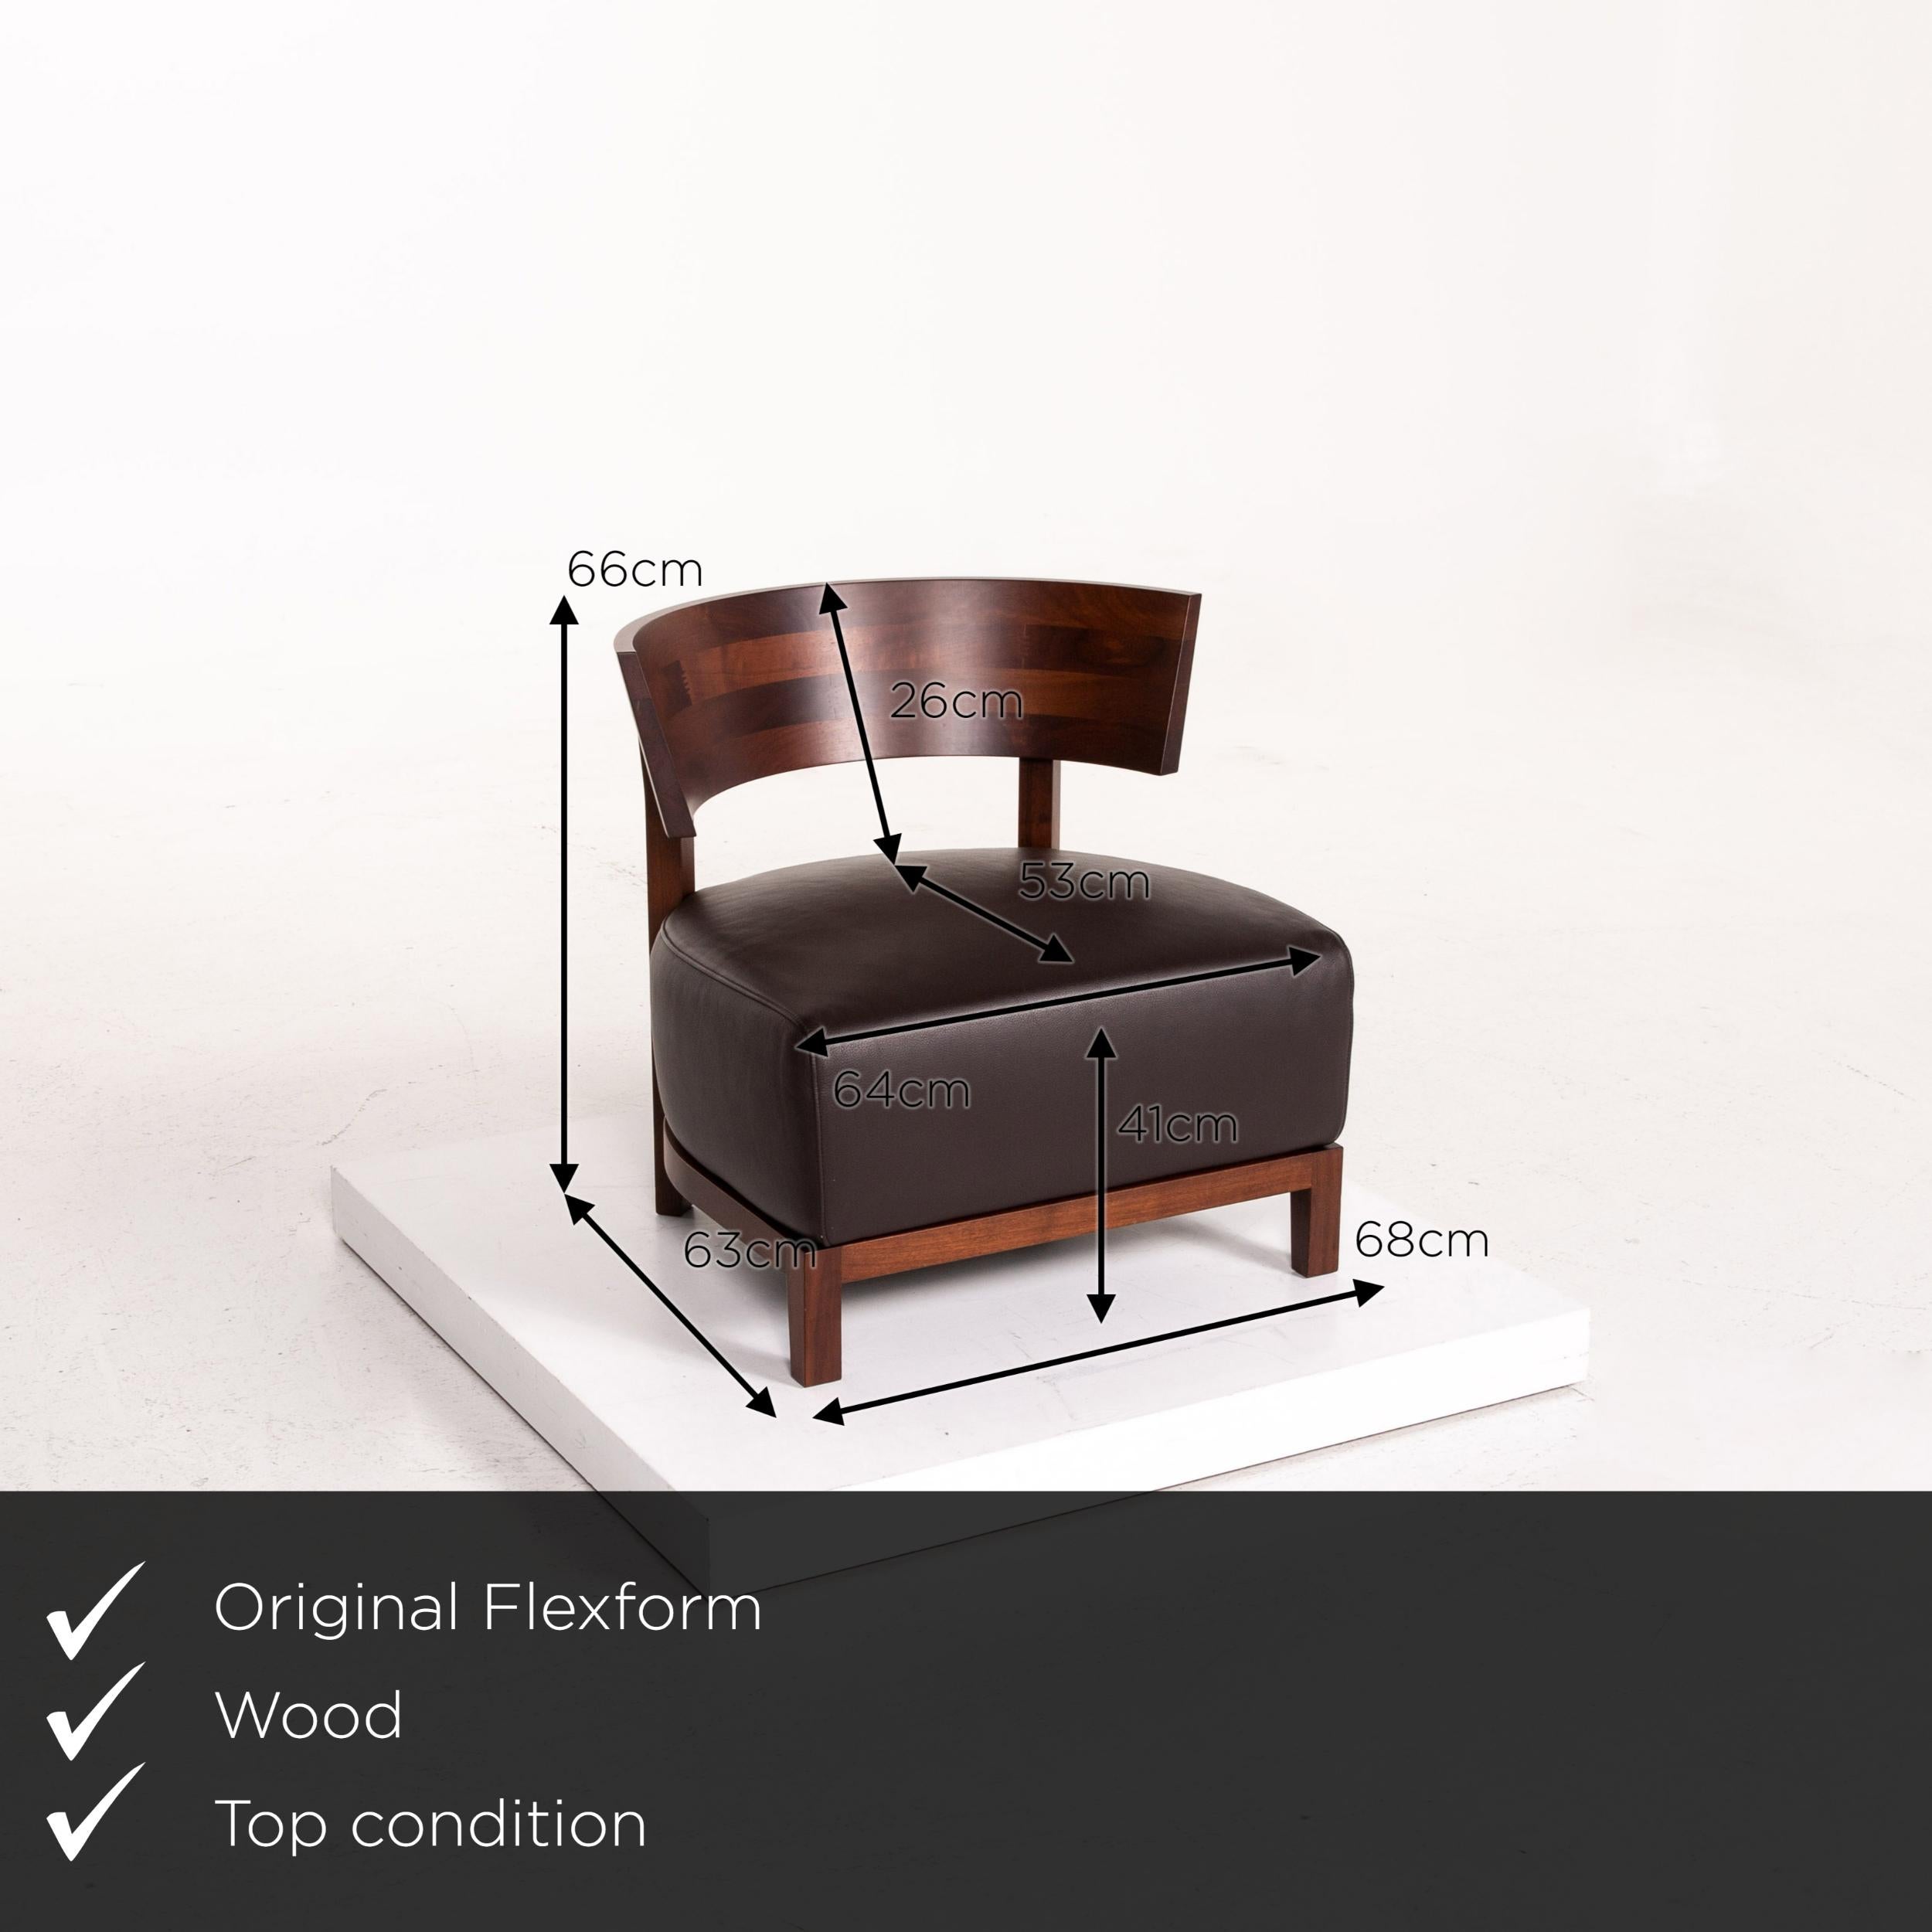 We present to you a Flexform Thomas wood leather armchair set brown dark brown 2 chair Antonio.
 

 Product measurements in centimeters:
 

Depth 63
Width 68
Height 66
Seat height 41
Rest height 68
Seat depth 53
Seat width 64
Back